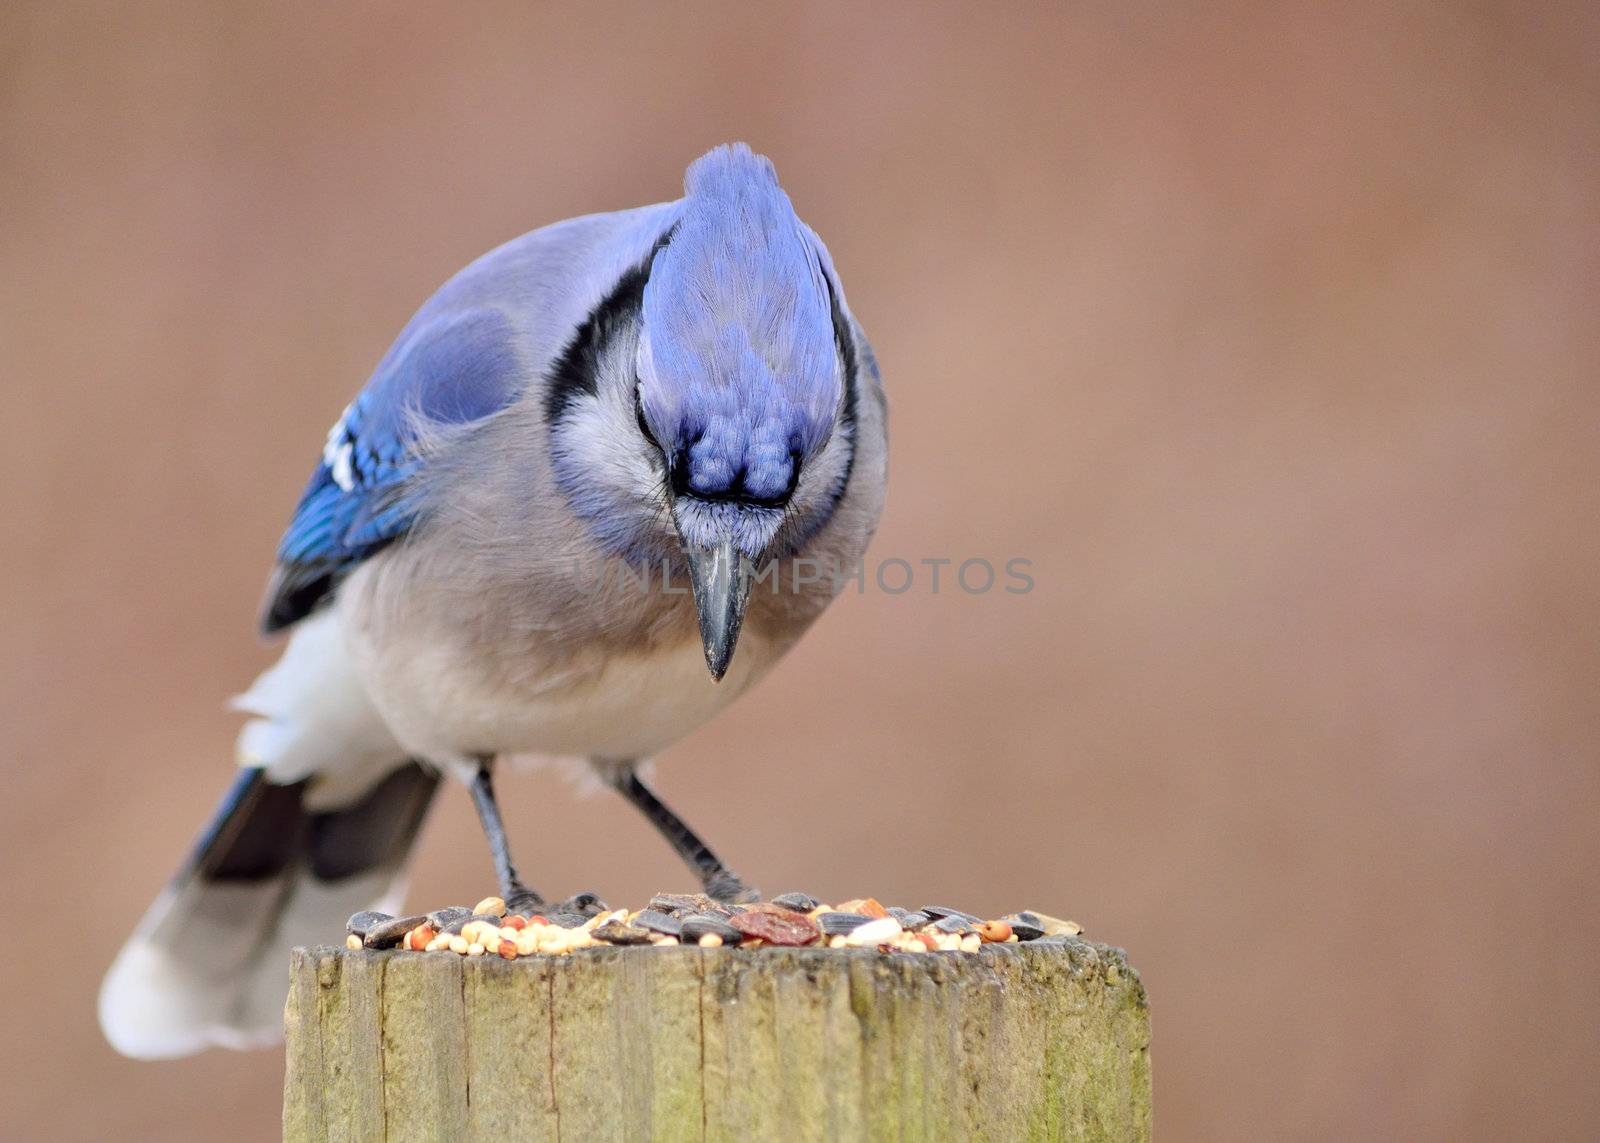 Blue jay by brm1949